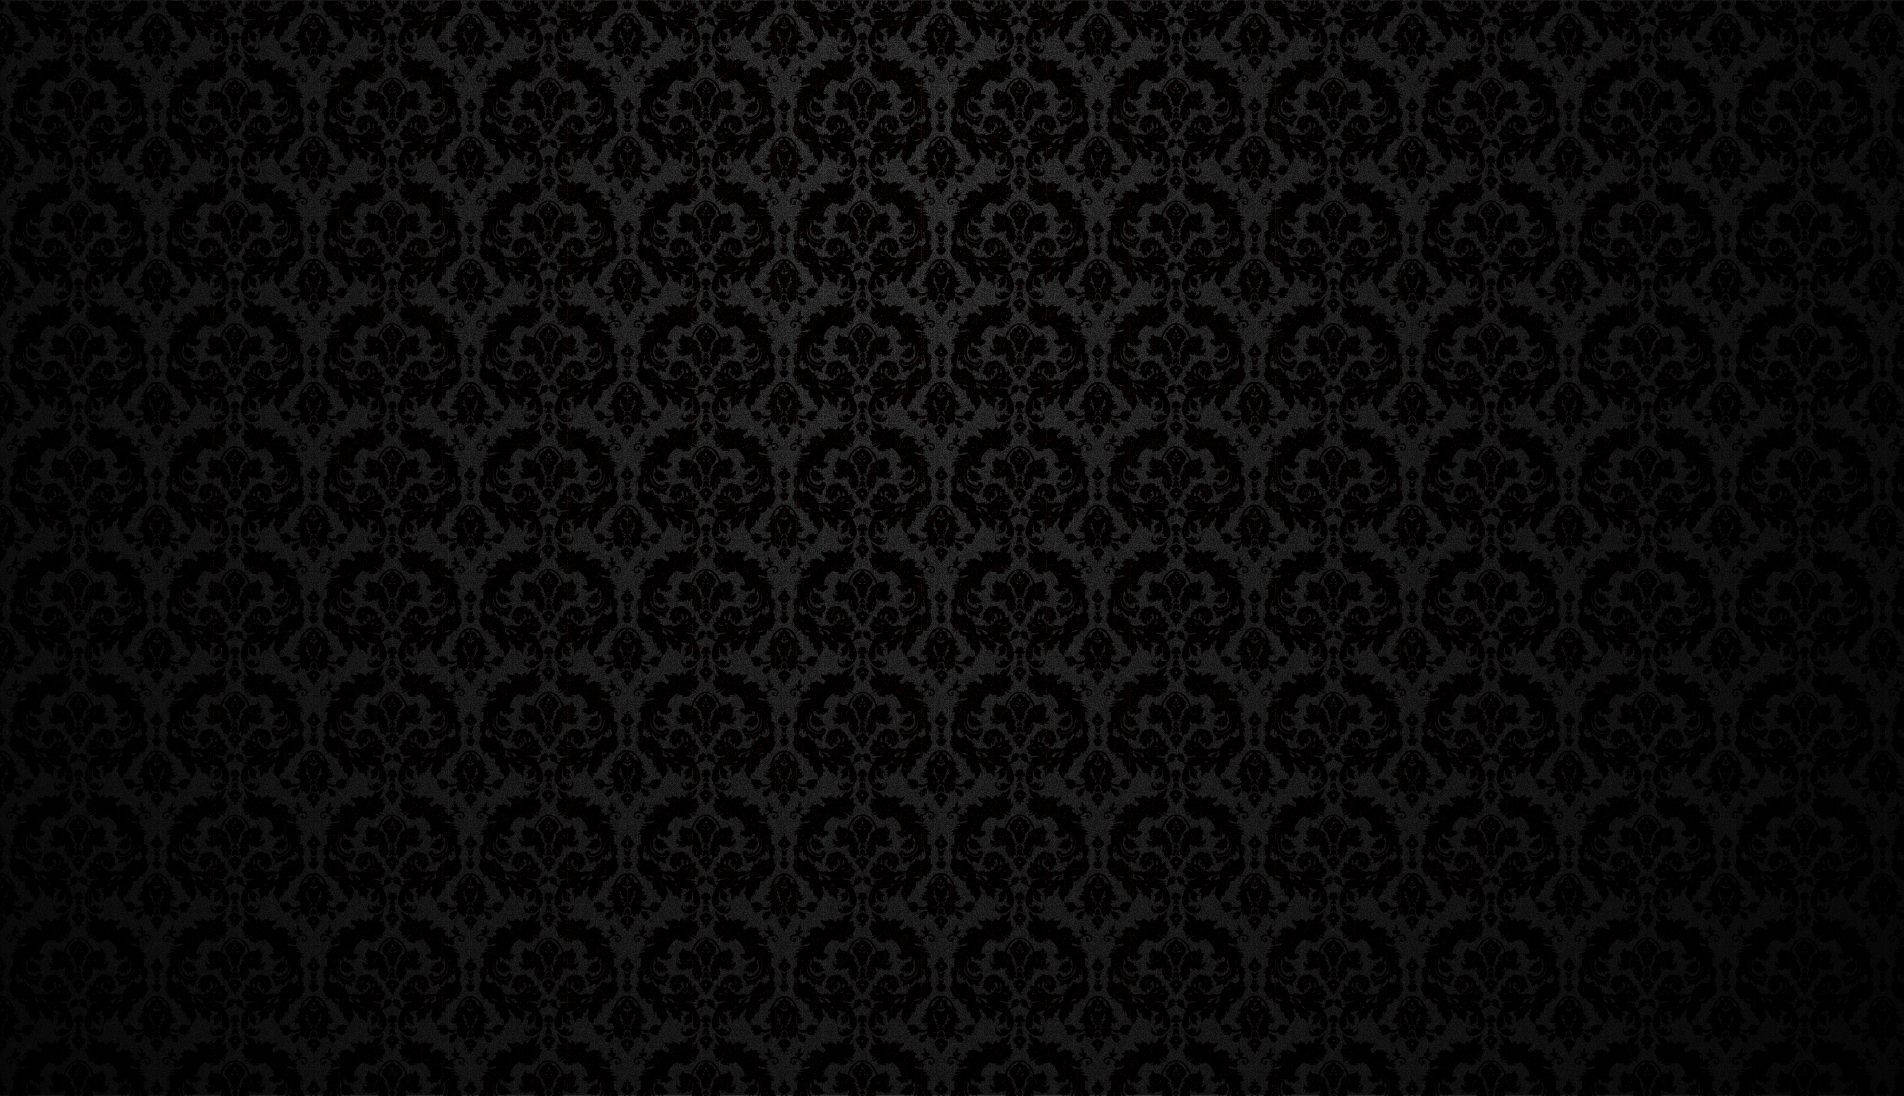 Luxuriously Vibrant Black And Gold Wallpaper